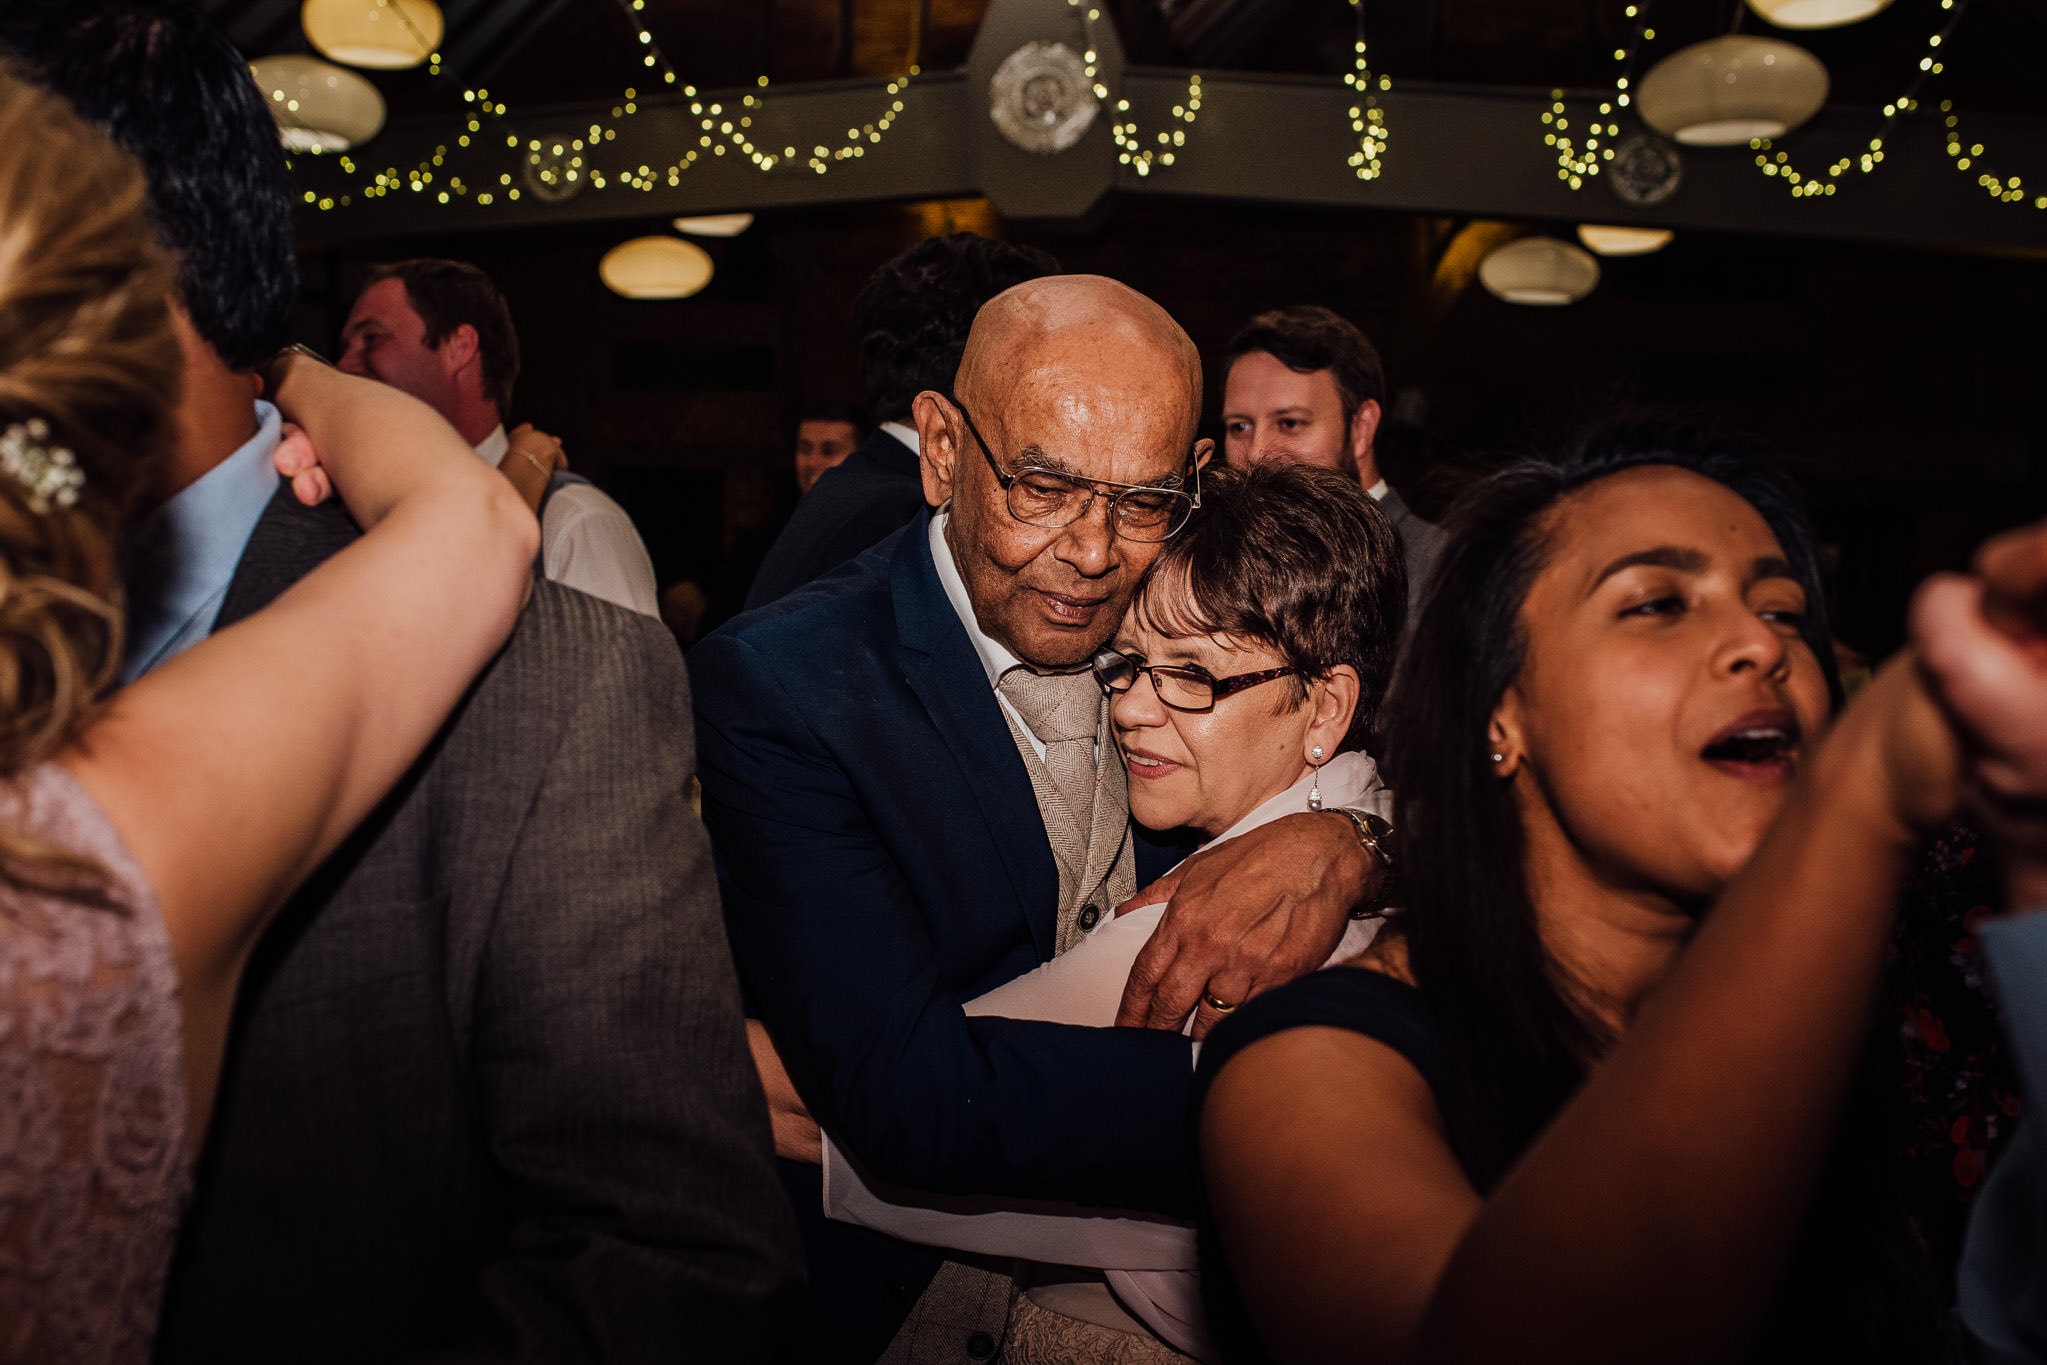 bride and grooms' parents cuddling on the dance floor